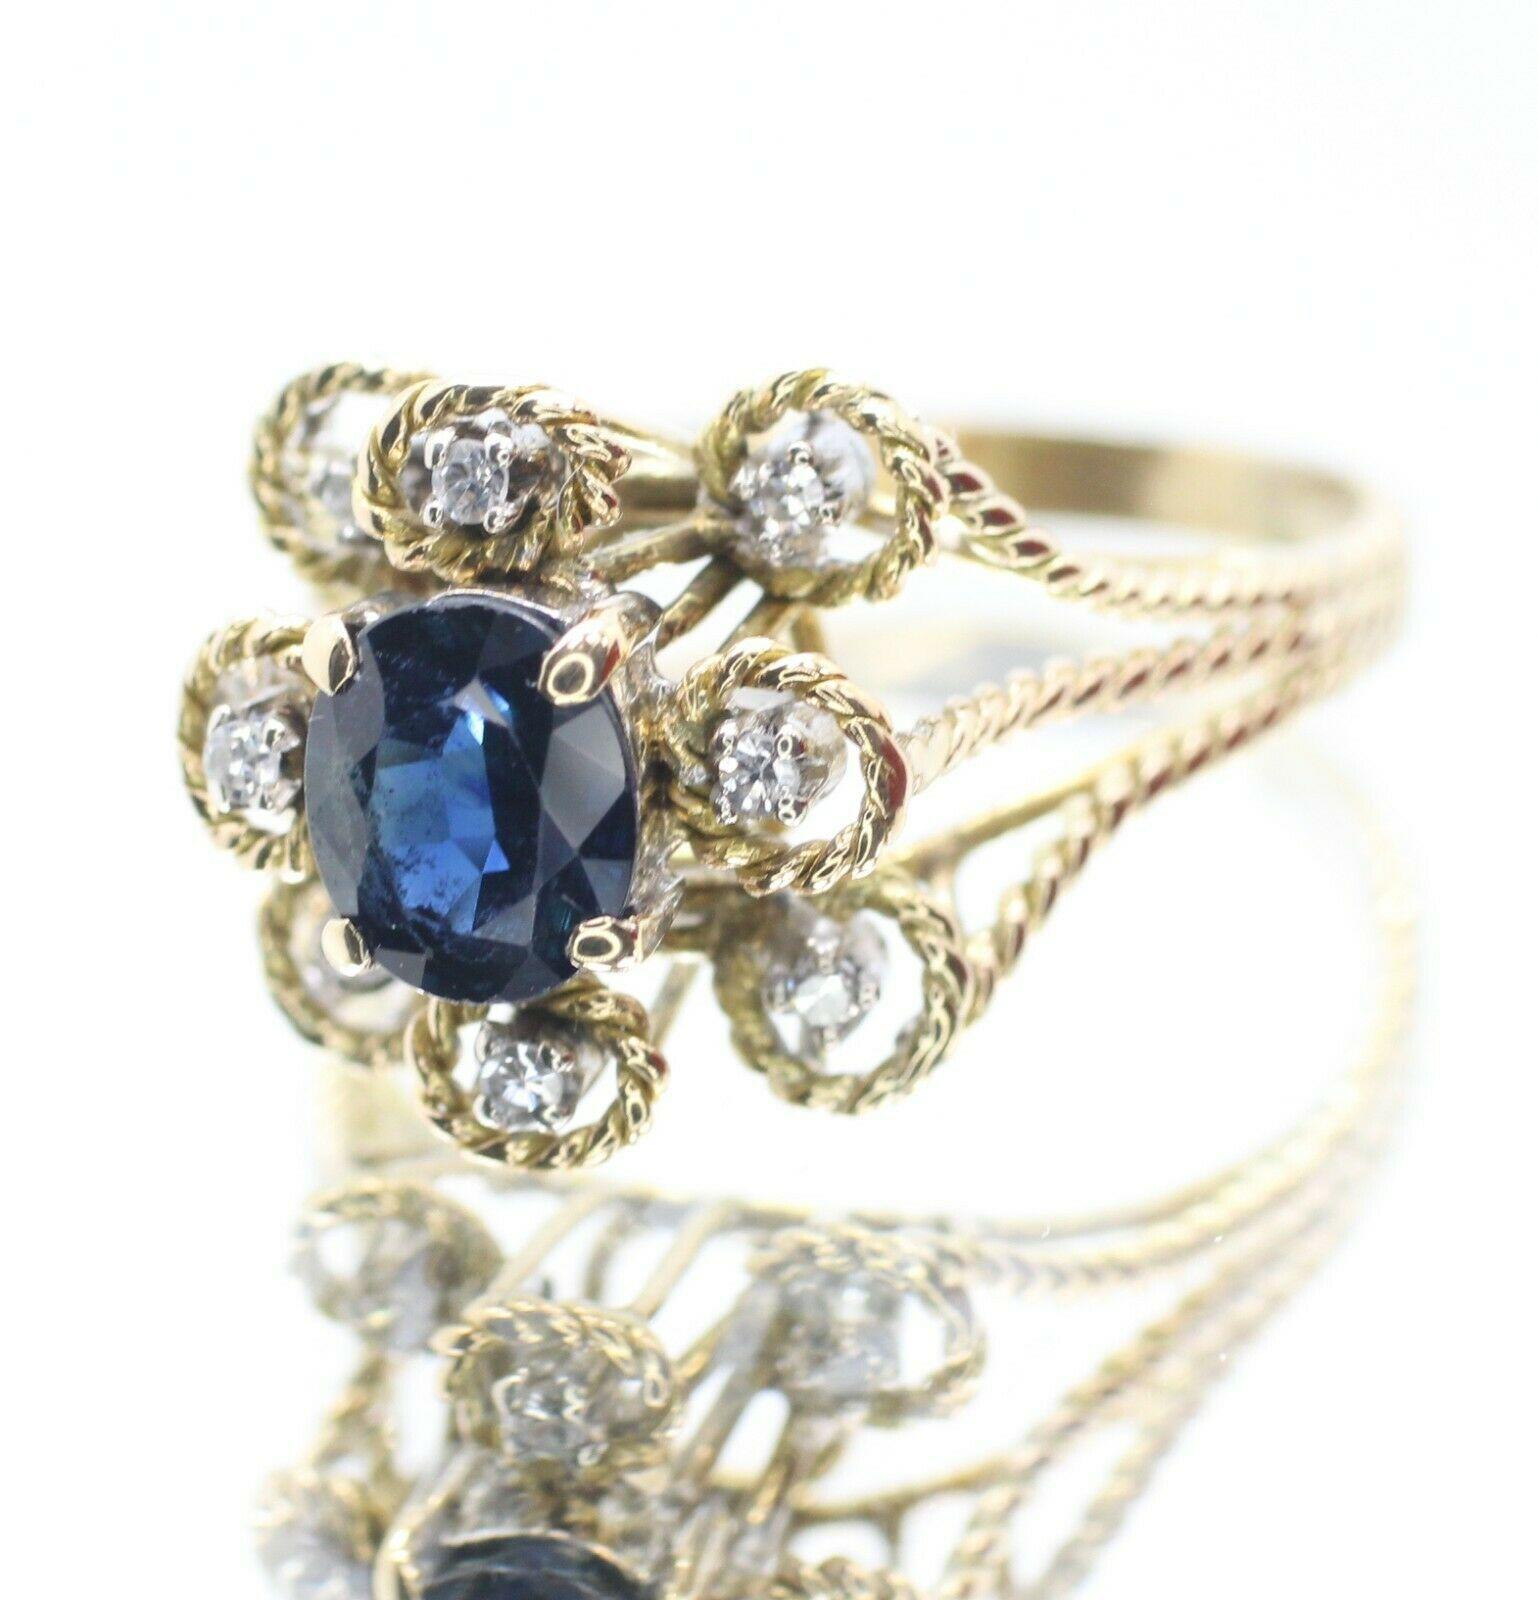  Beautiful vintage cluster ring. This ring features a oval cut blue sapphire in approximately 6.73 x 5.67 mm with 8 pcs round cut diamond in approximately 0.06 carat total weight.The current size of the ring is 8.75US.
Specifications:
    main